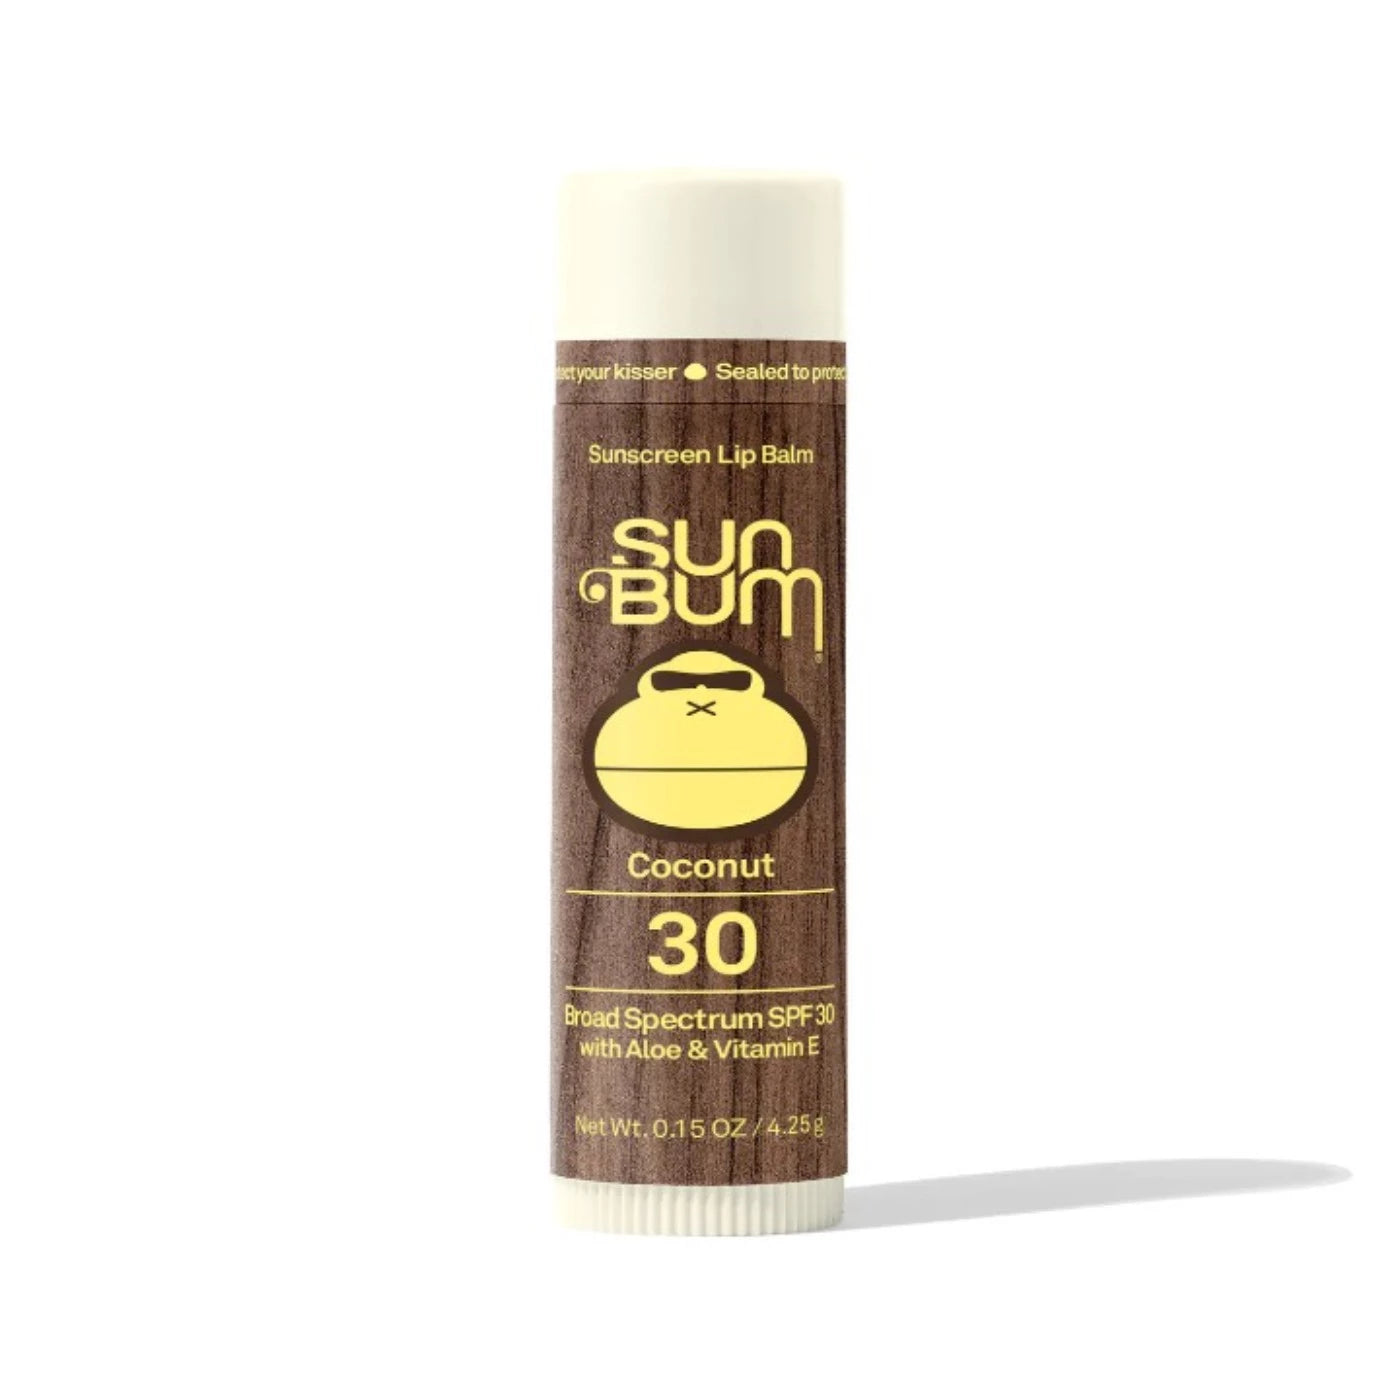 Lip balm container with a white top and bottom, wood grain centre, along with the sun bum wordmark and mascot